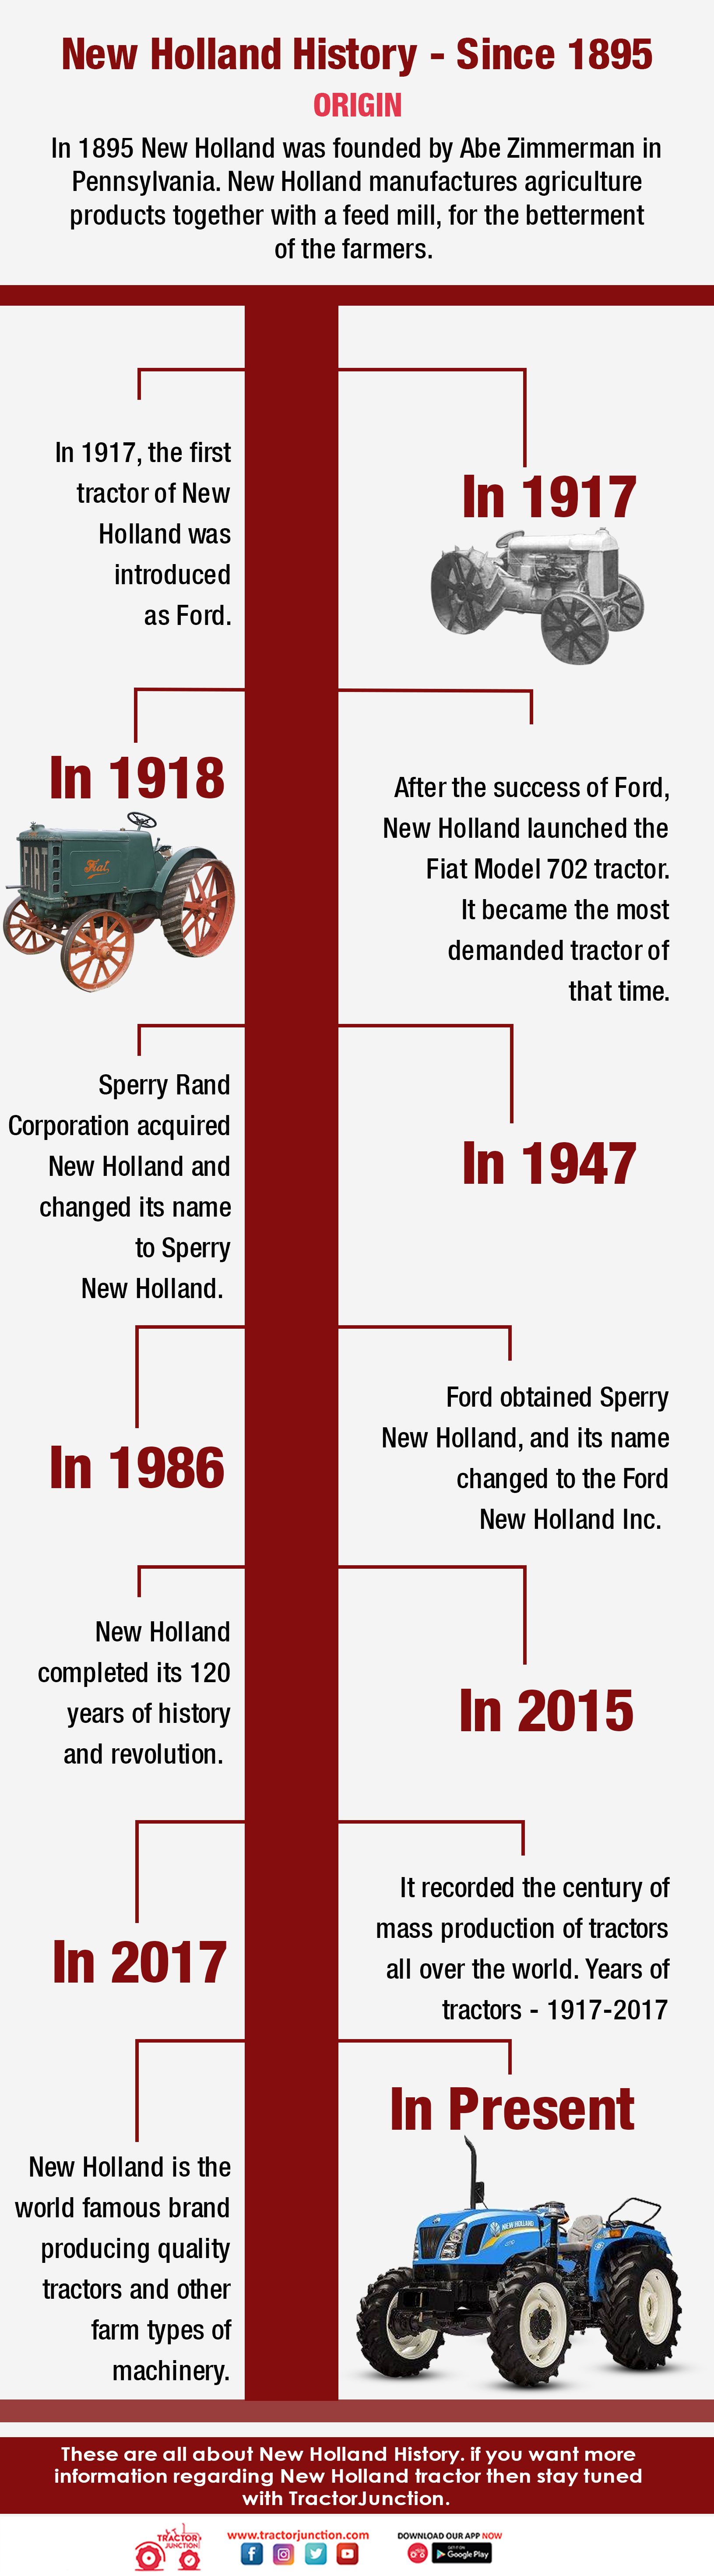 New Holland Tractor History, Since 1895 - Infographic 